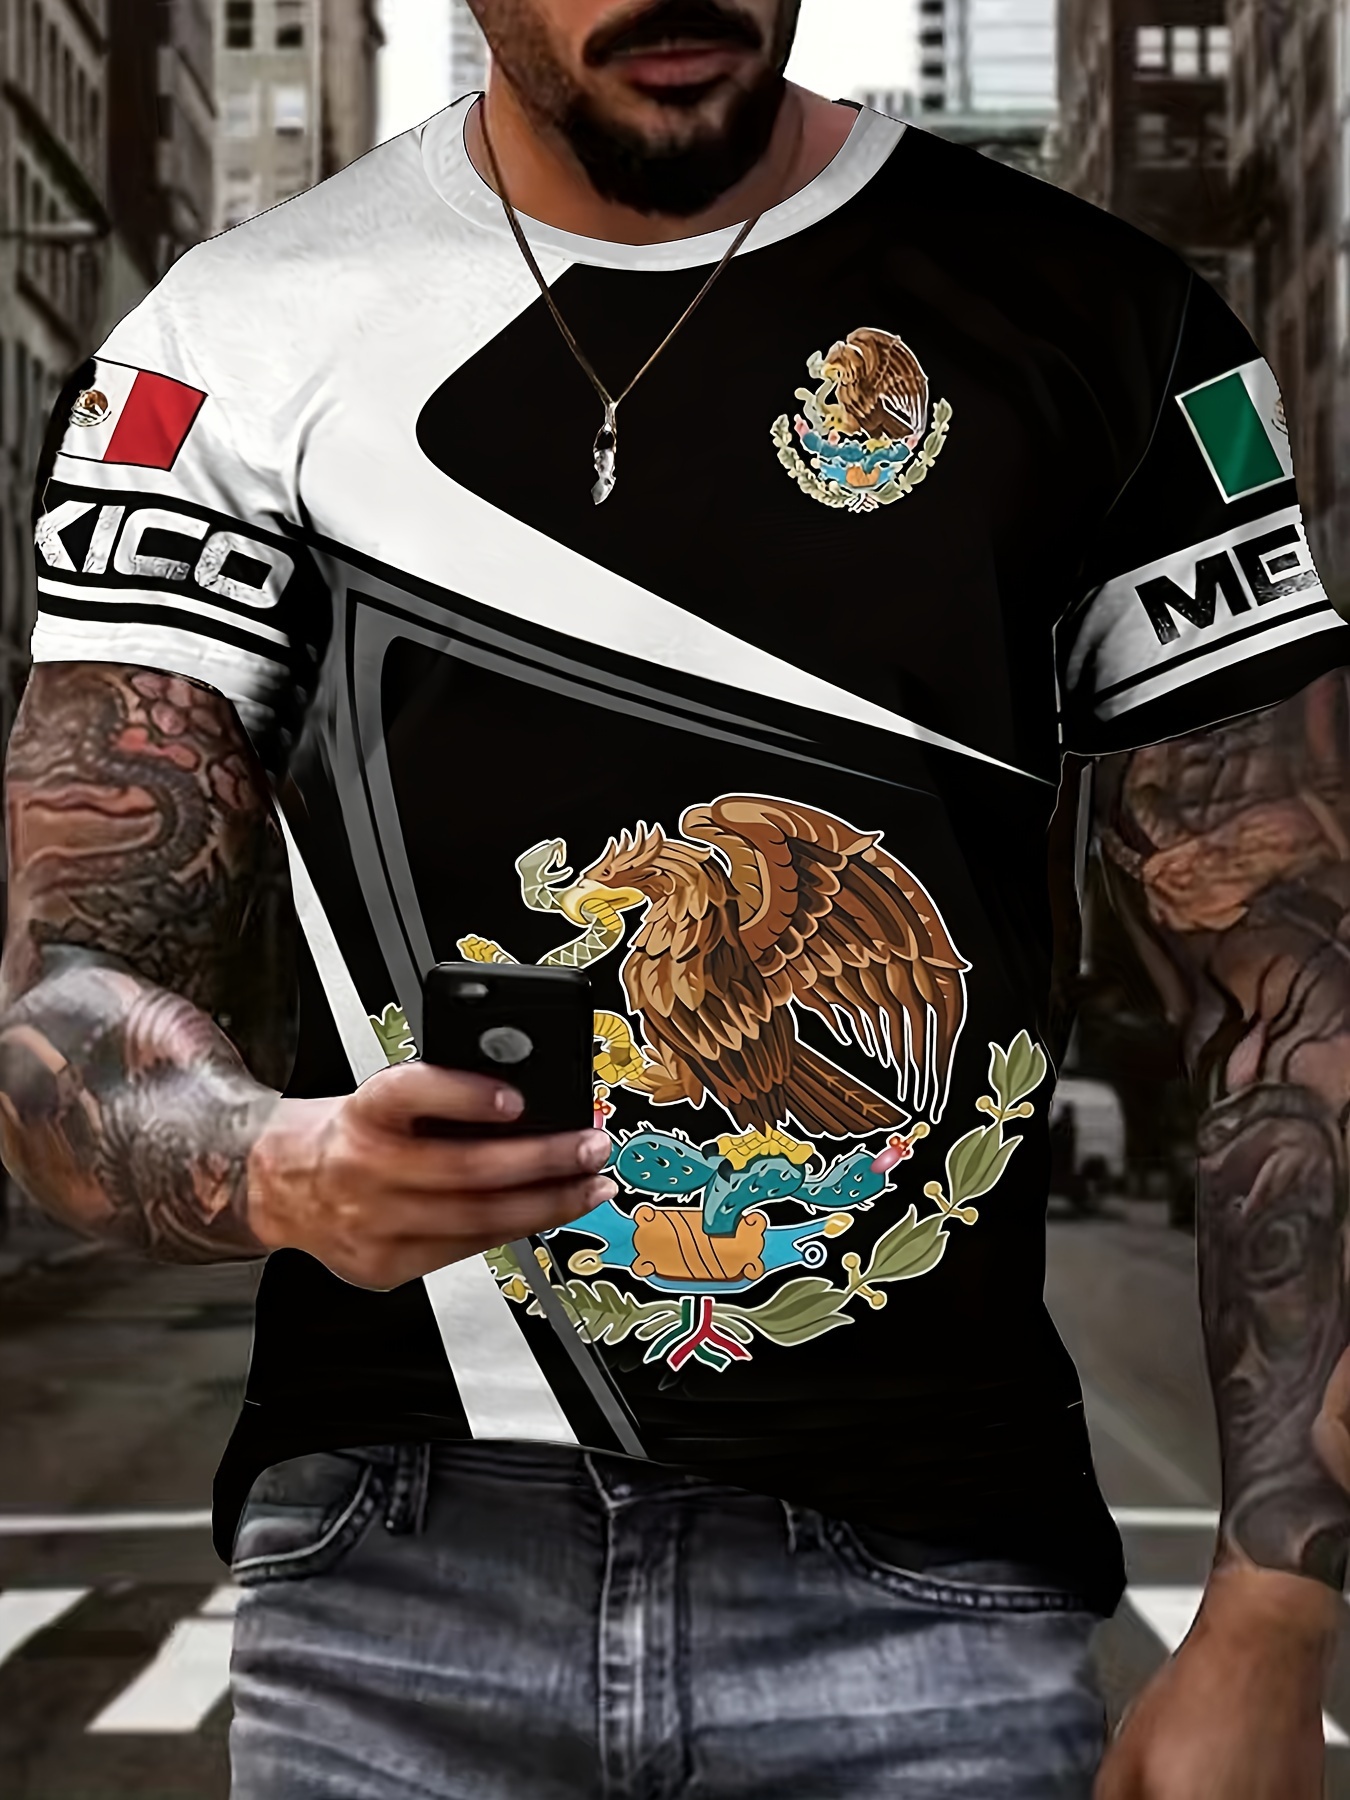 Mexico Themed 3D Print Men's Fashion Short Sleeve Comfy T-shirt For Summer  Outdoor, Gift For Men